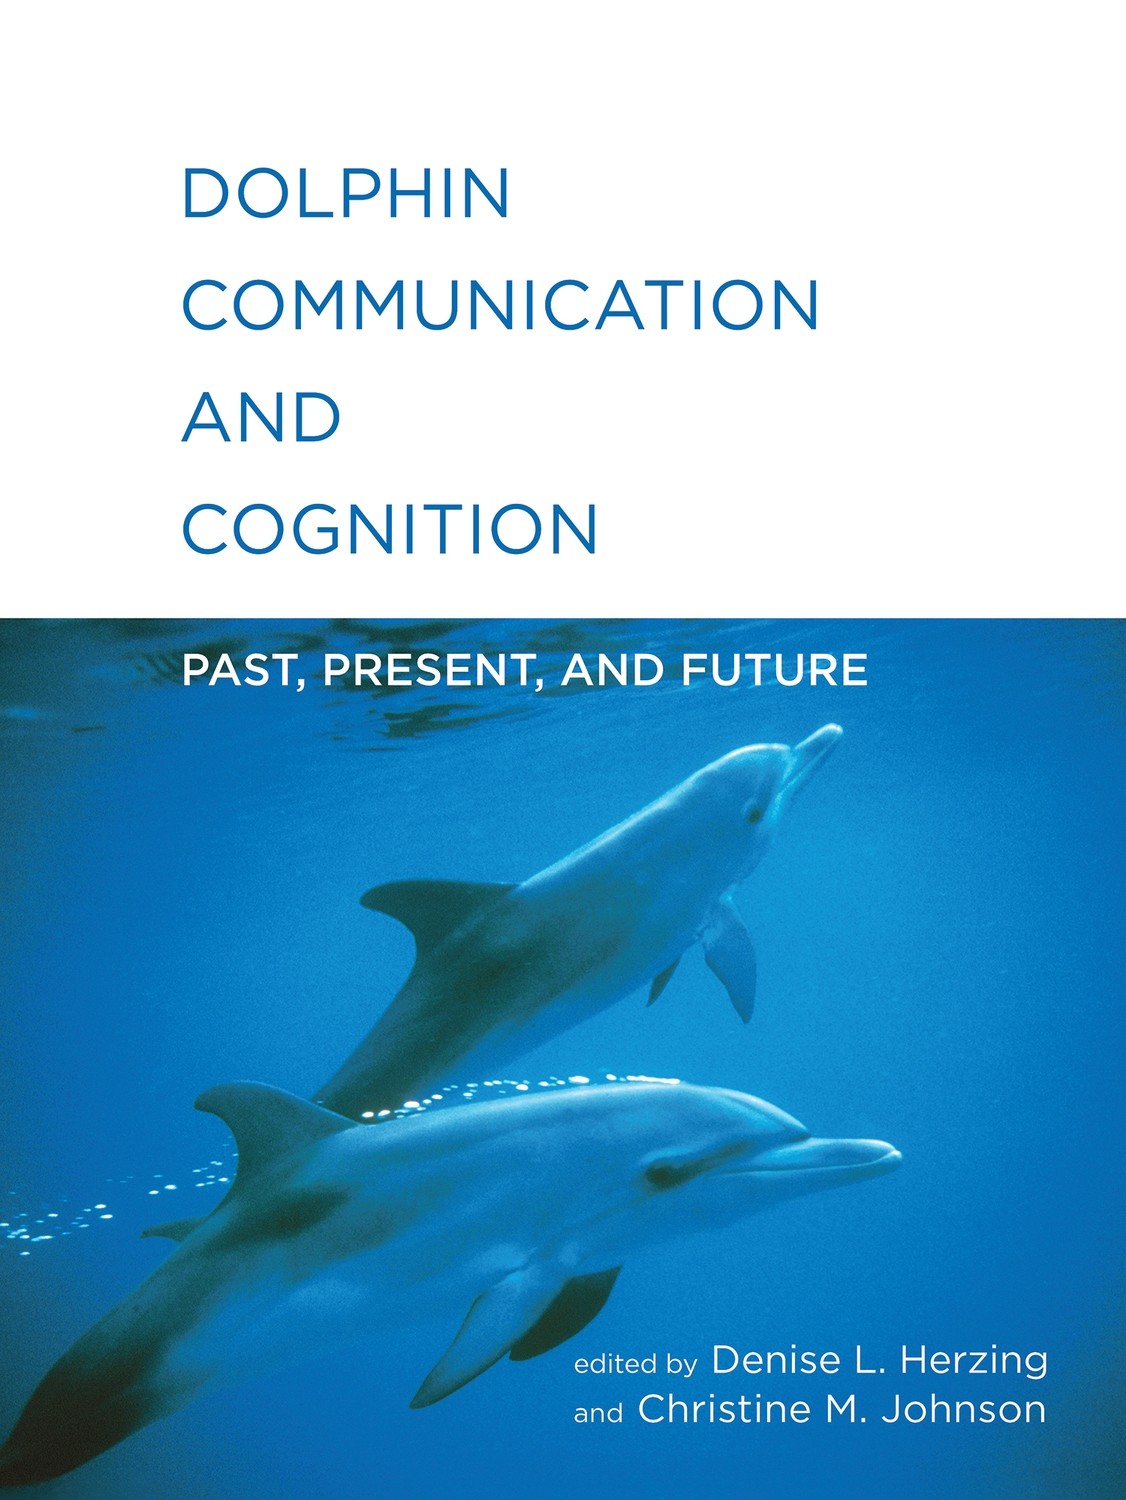 Book: Dolphin Communication and Cognition - Past, Present, and Future